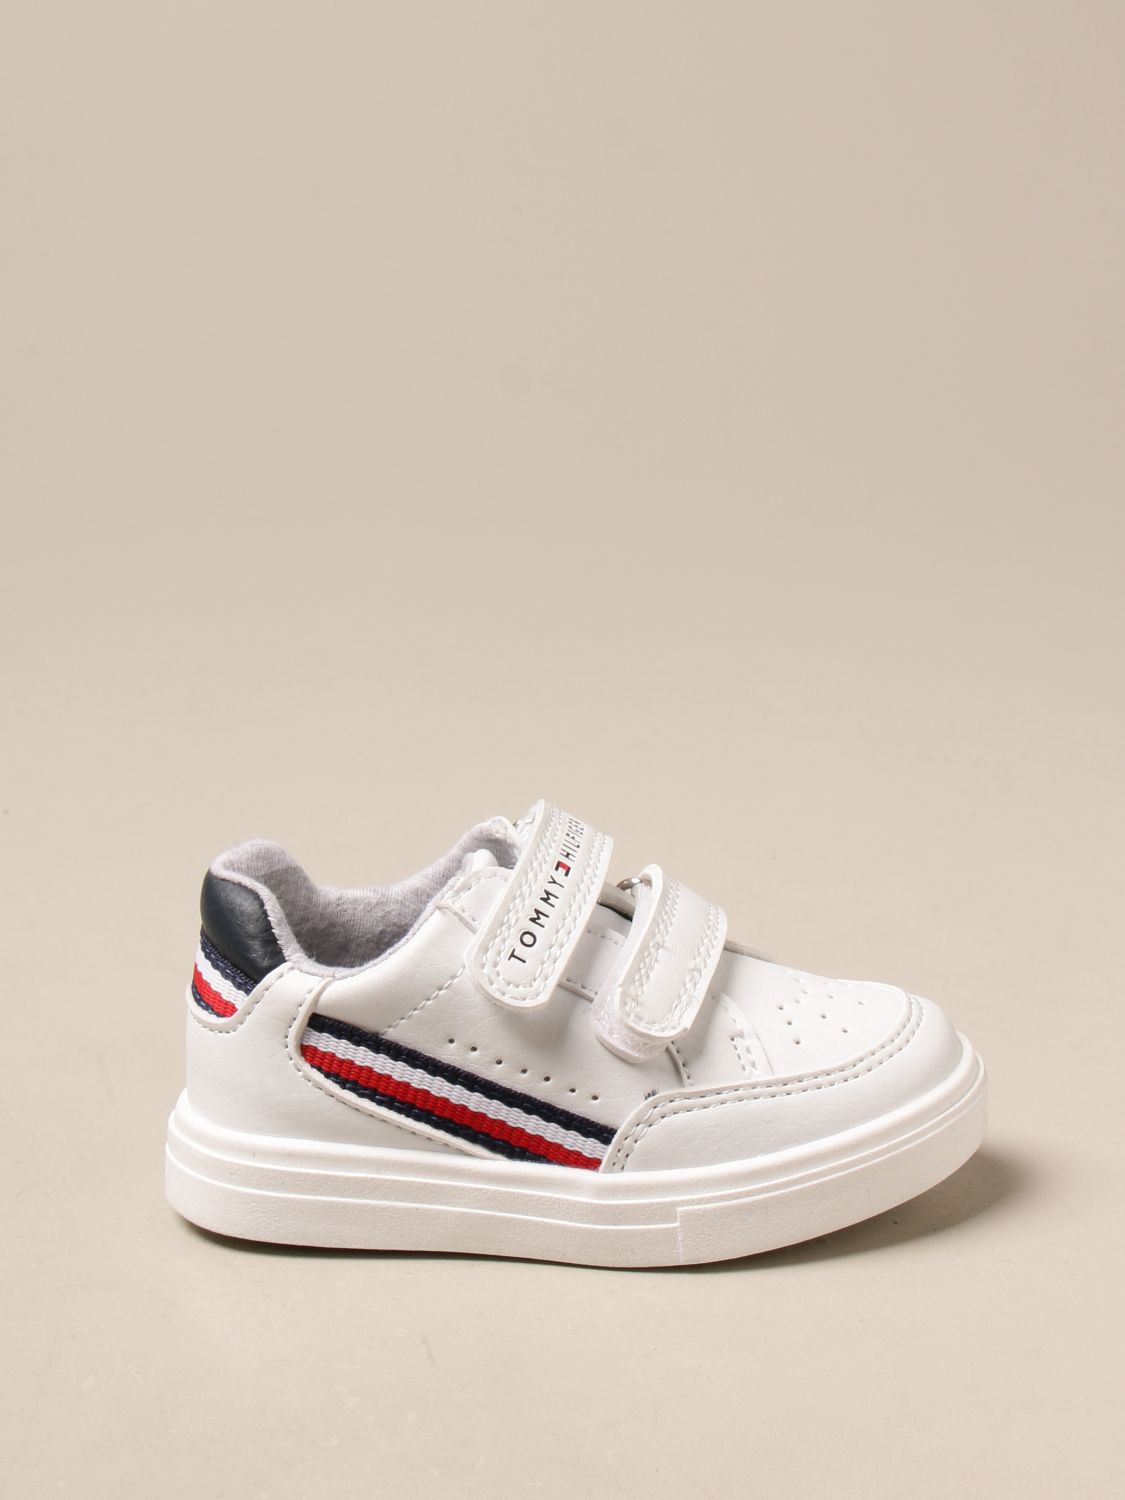 TOMMY HILFIGER: shoes for boys - White | Tommy Hilfiger shoes online at GIGLIO.COM